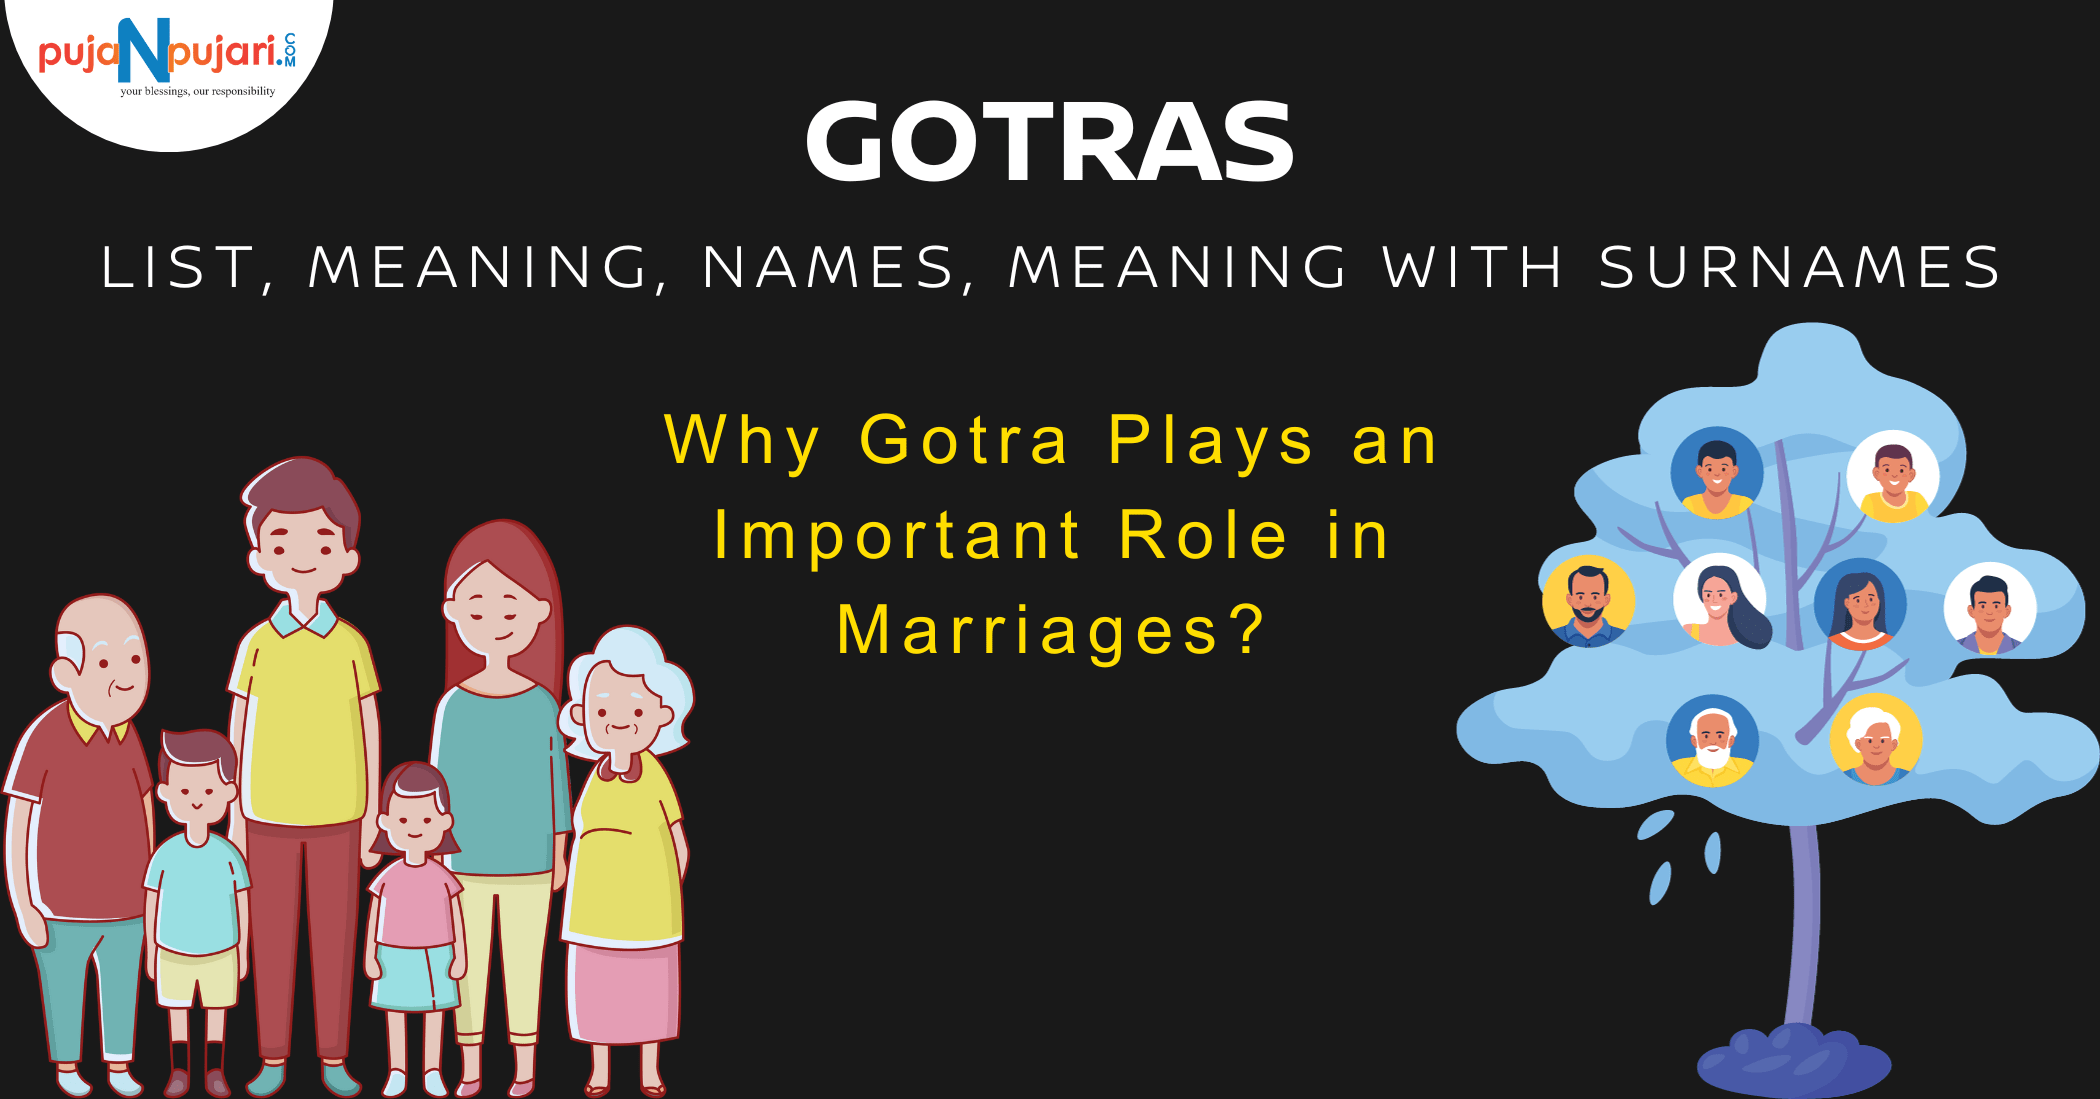 Gotras List, Meaning, Names, Meaning with Surnames